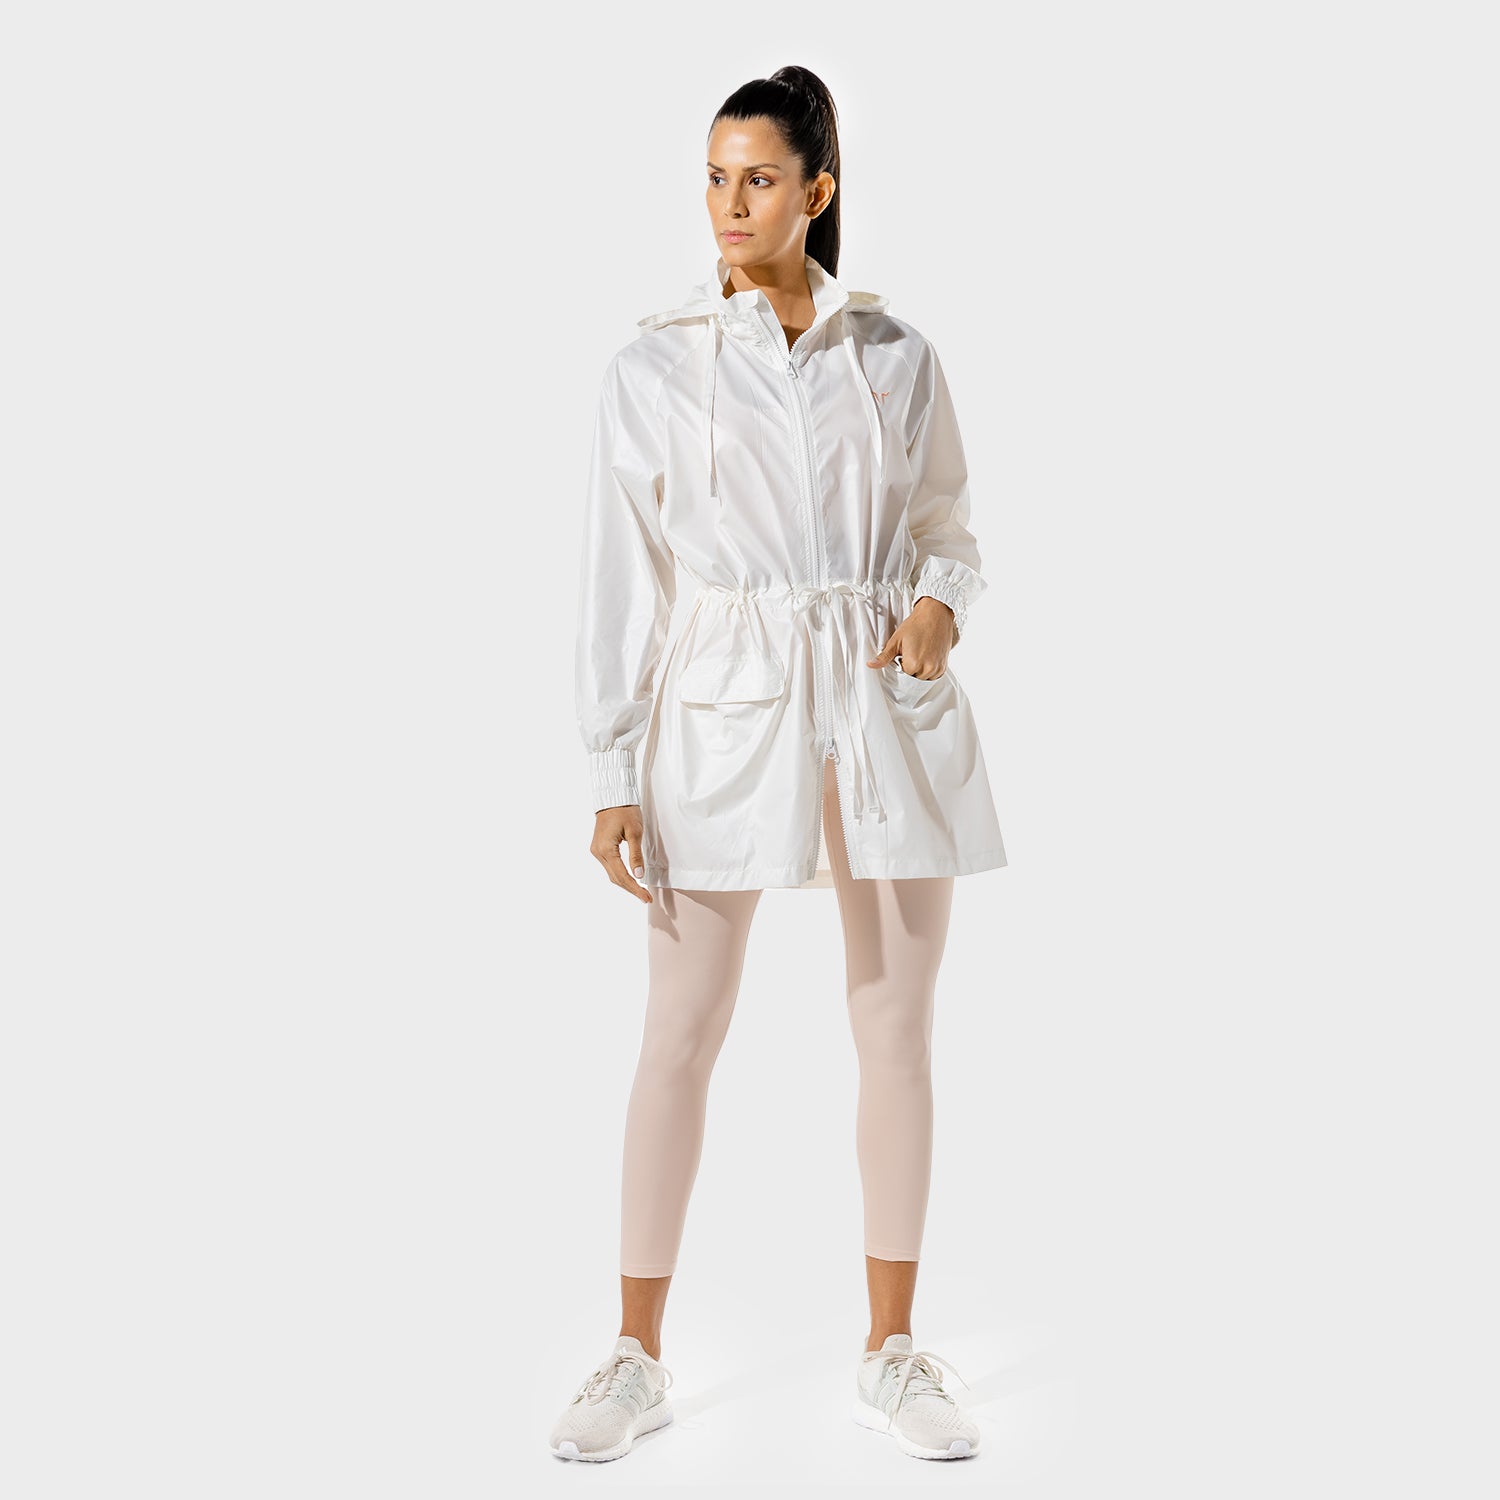 squatwolf-workout-clothes-womens-fitness-long-jacket-white-athletic-tops-women